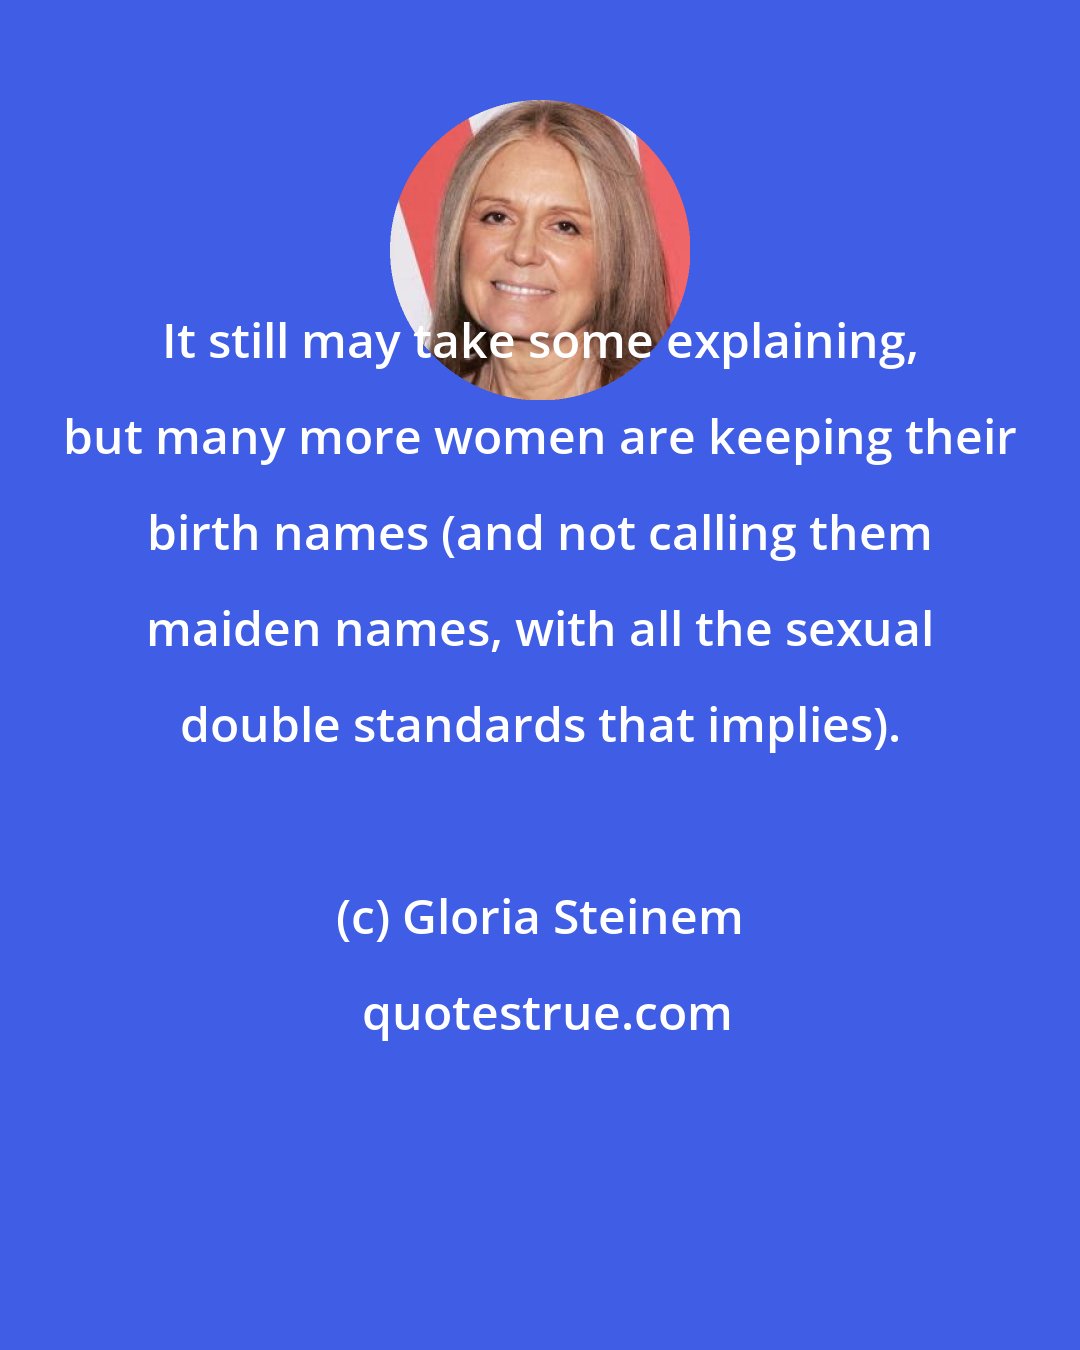 Gloria Steinem: It still may take some explaining, but many more women are keeping their birth names (and not calling them maiden names, with all the sexual double standards that implies).